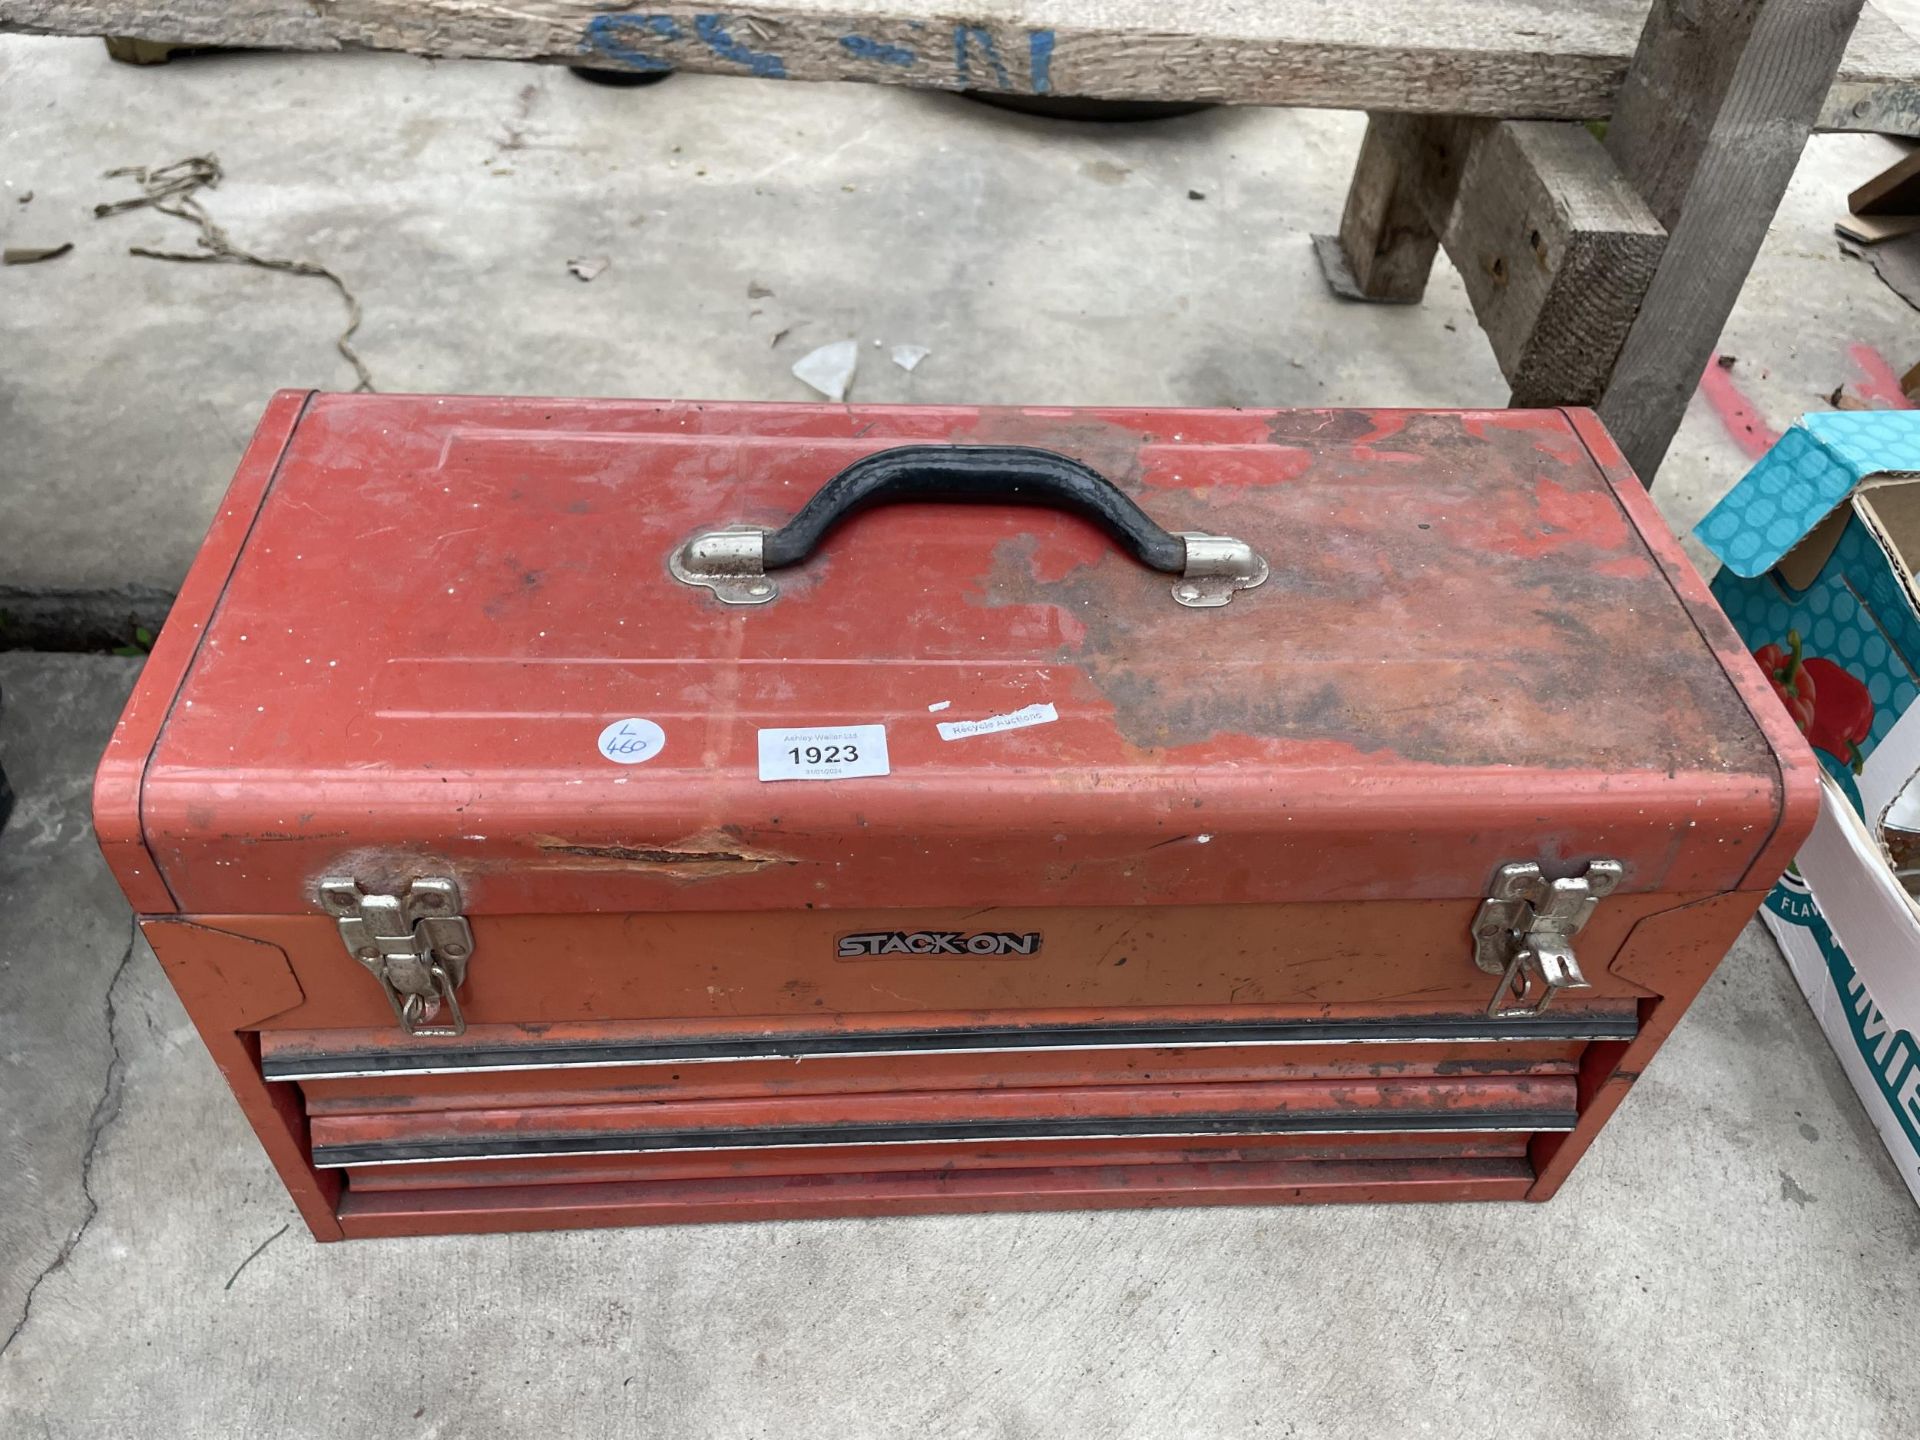 A RED METAL STACK ON TOOL BOX - Image 2 of 2